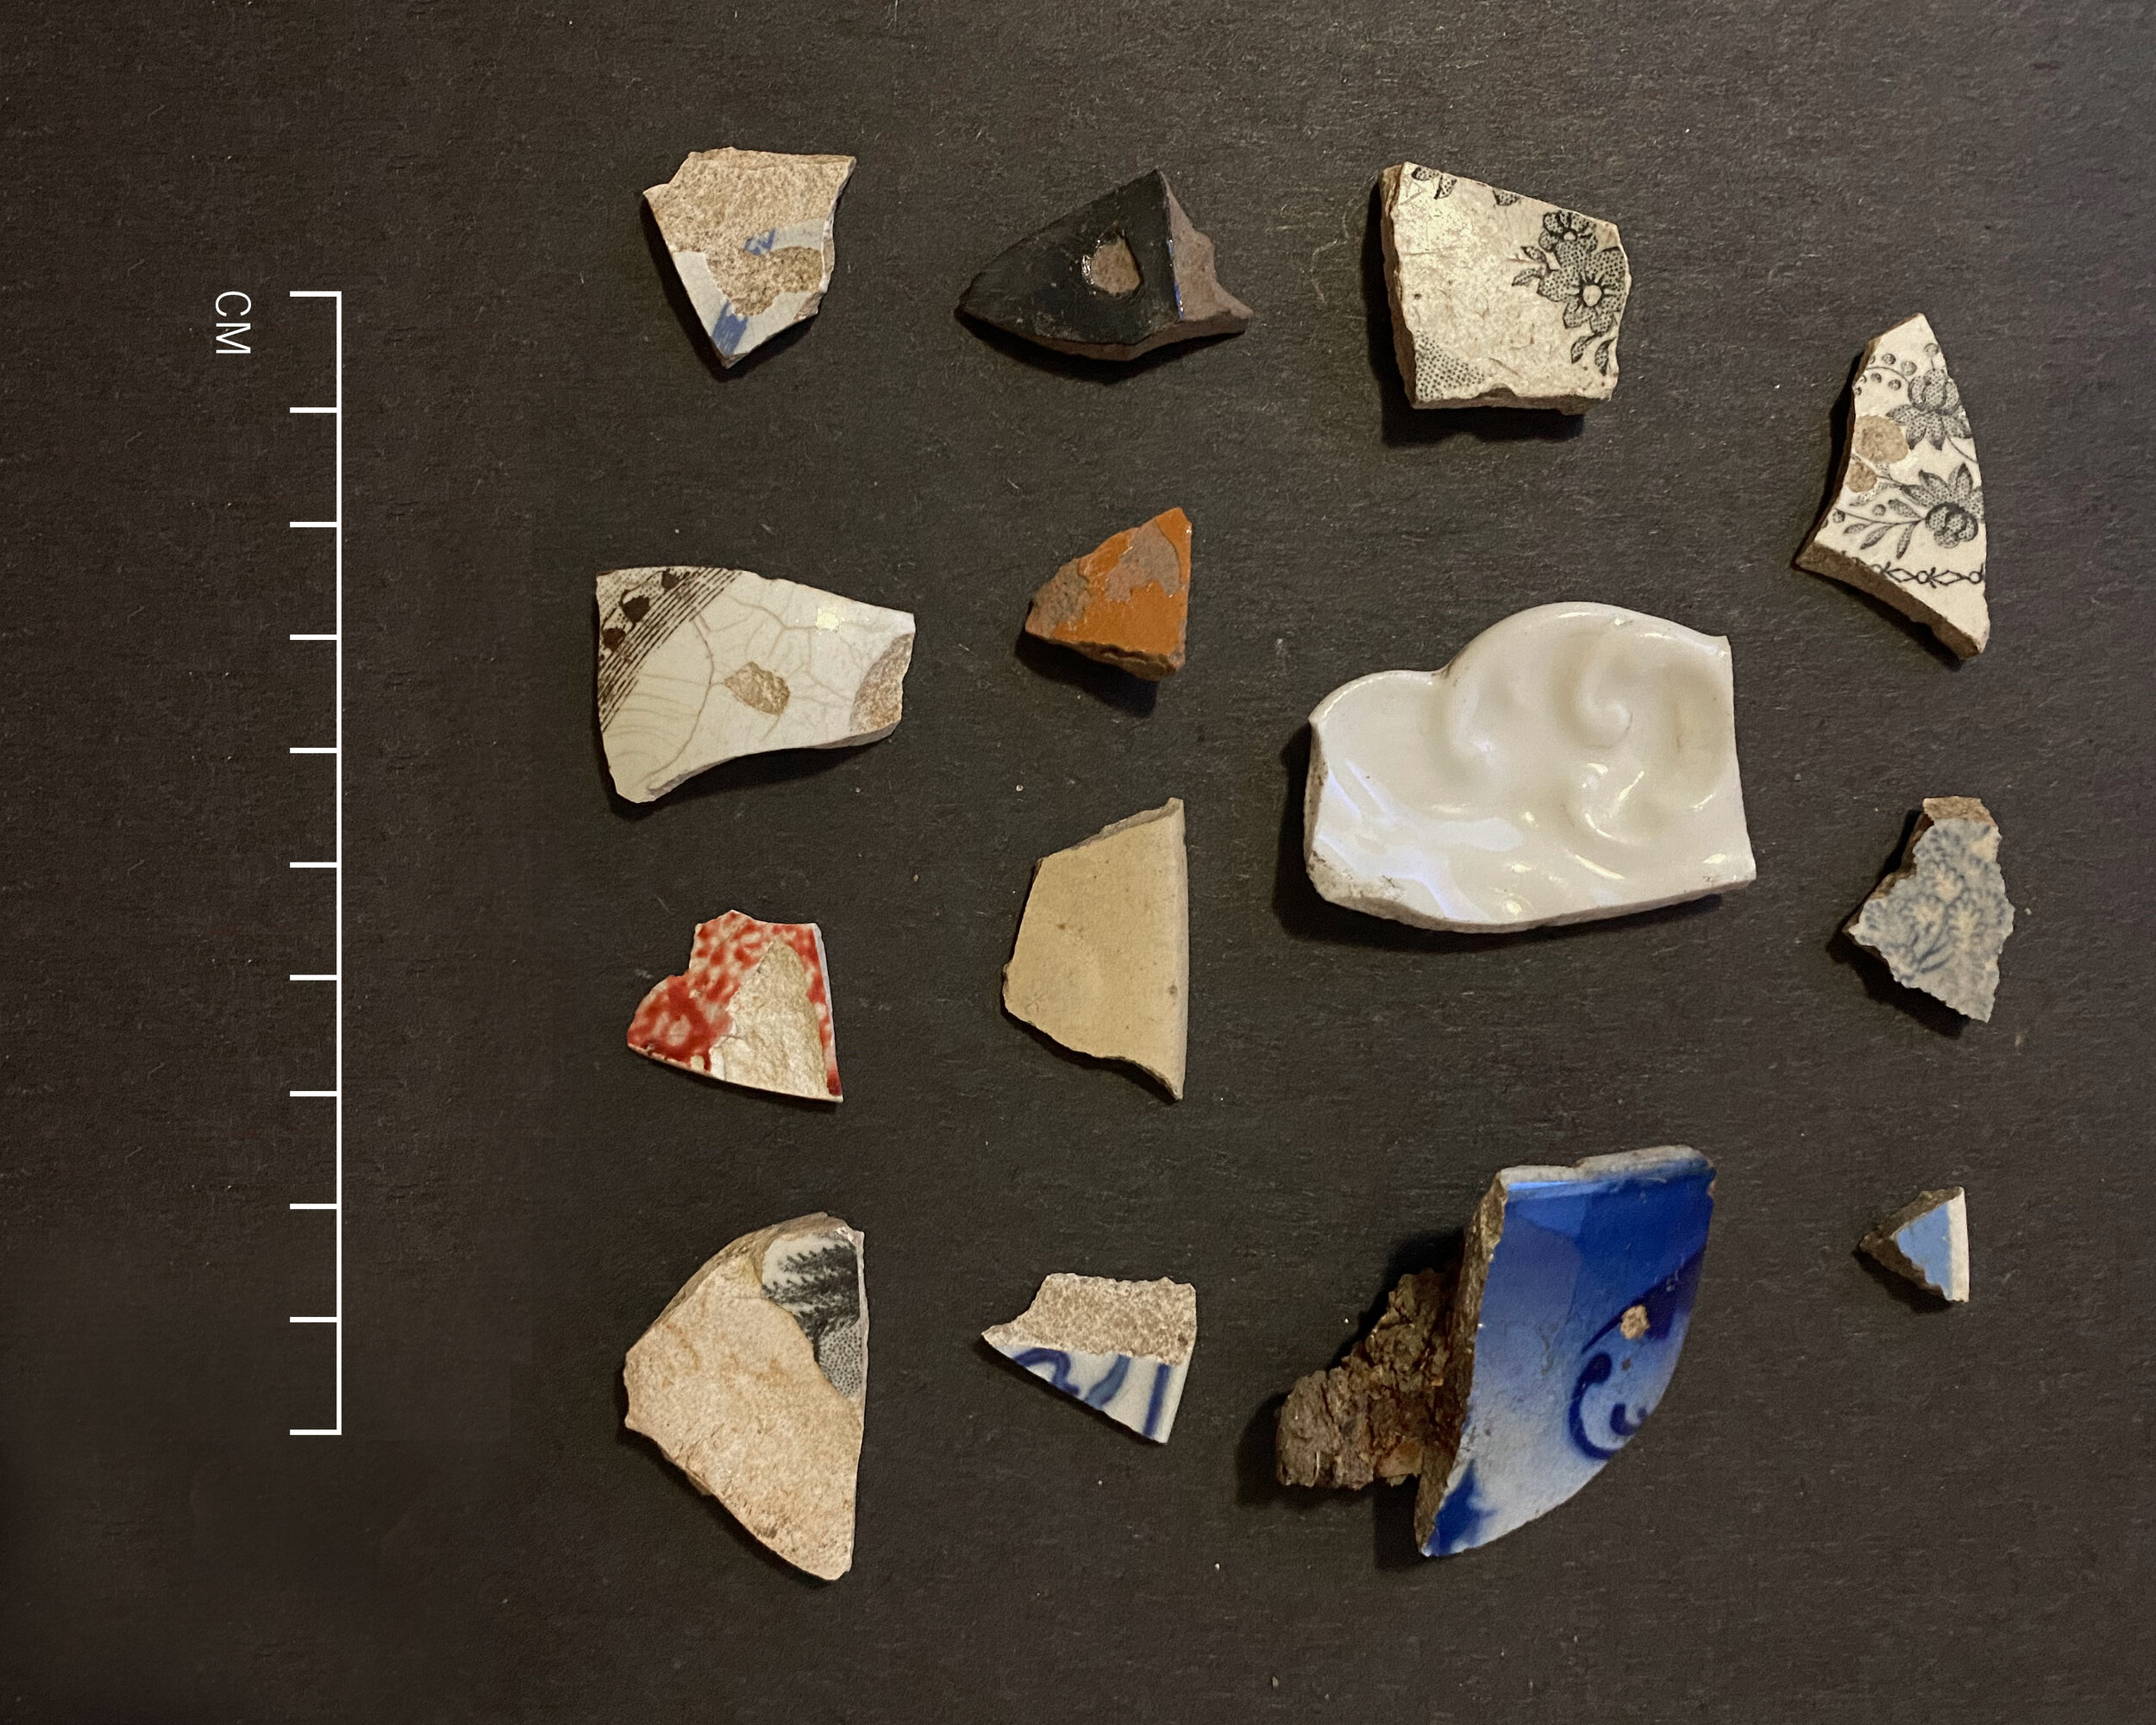   Historic ceramics recovered during archaeological investigations.  Courtesy of Allison McGovern 